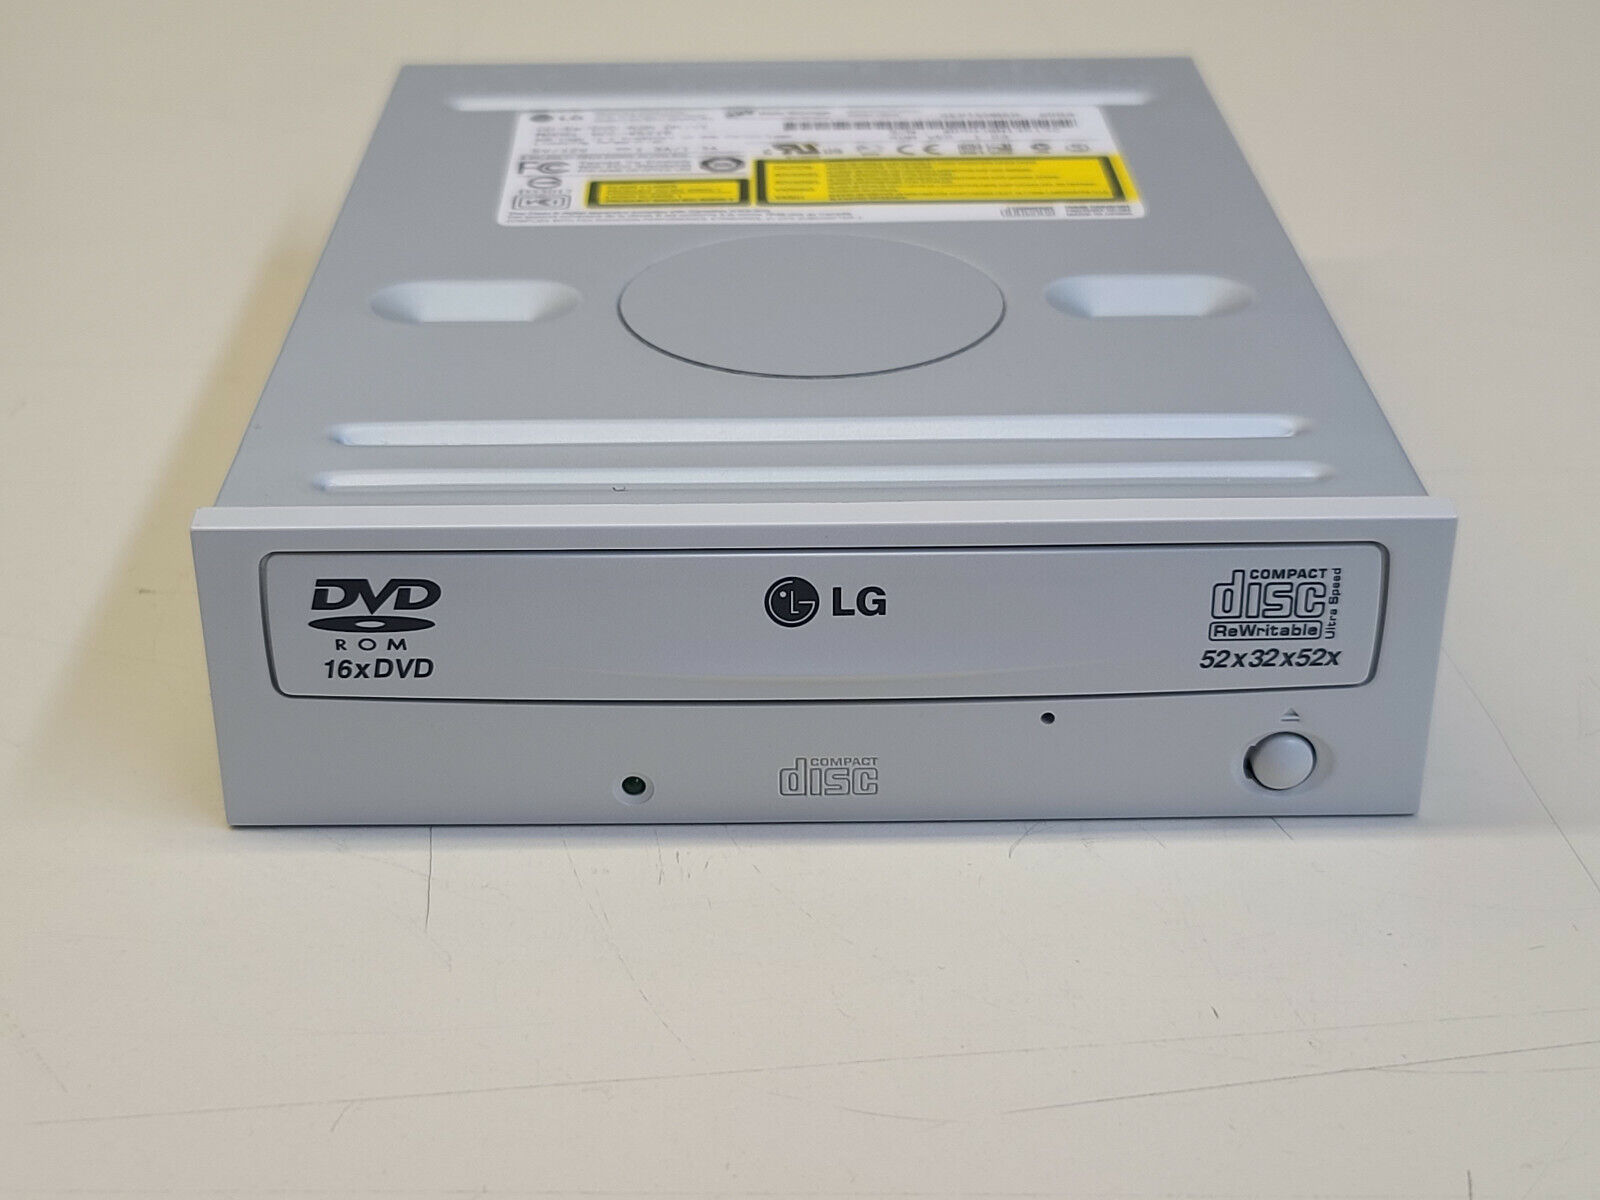 LG GCC-4521B Beige IDE 16x DVD-ROM 52x32x52x CD-RW COMBO September 2004 TESTED